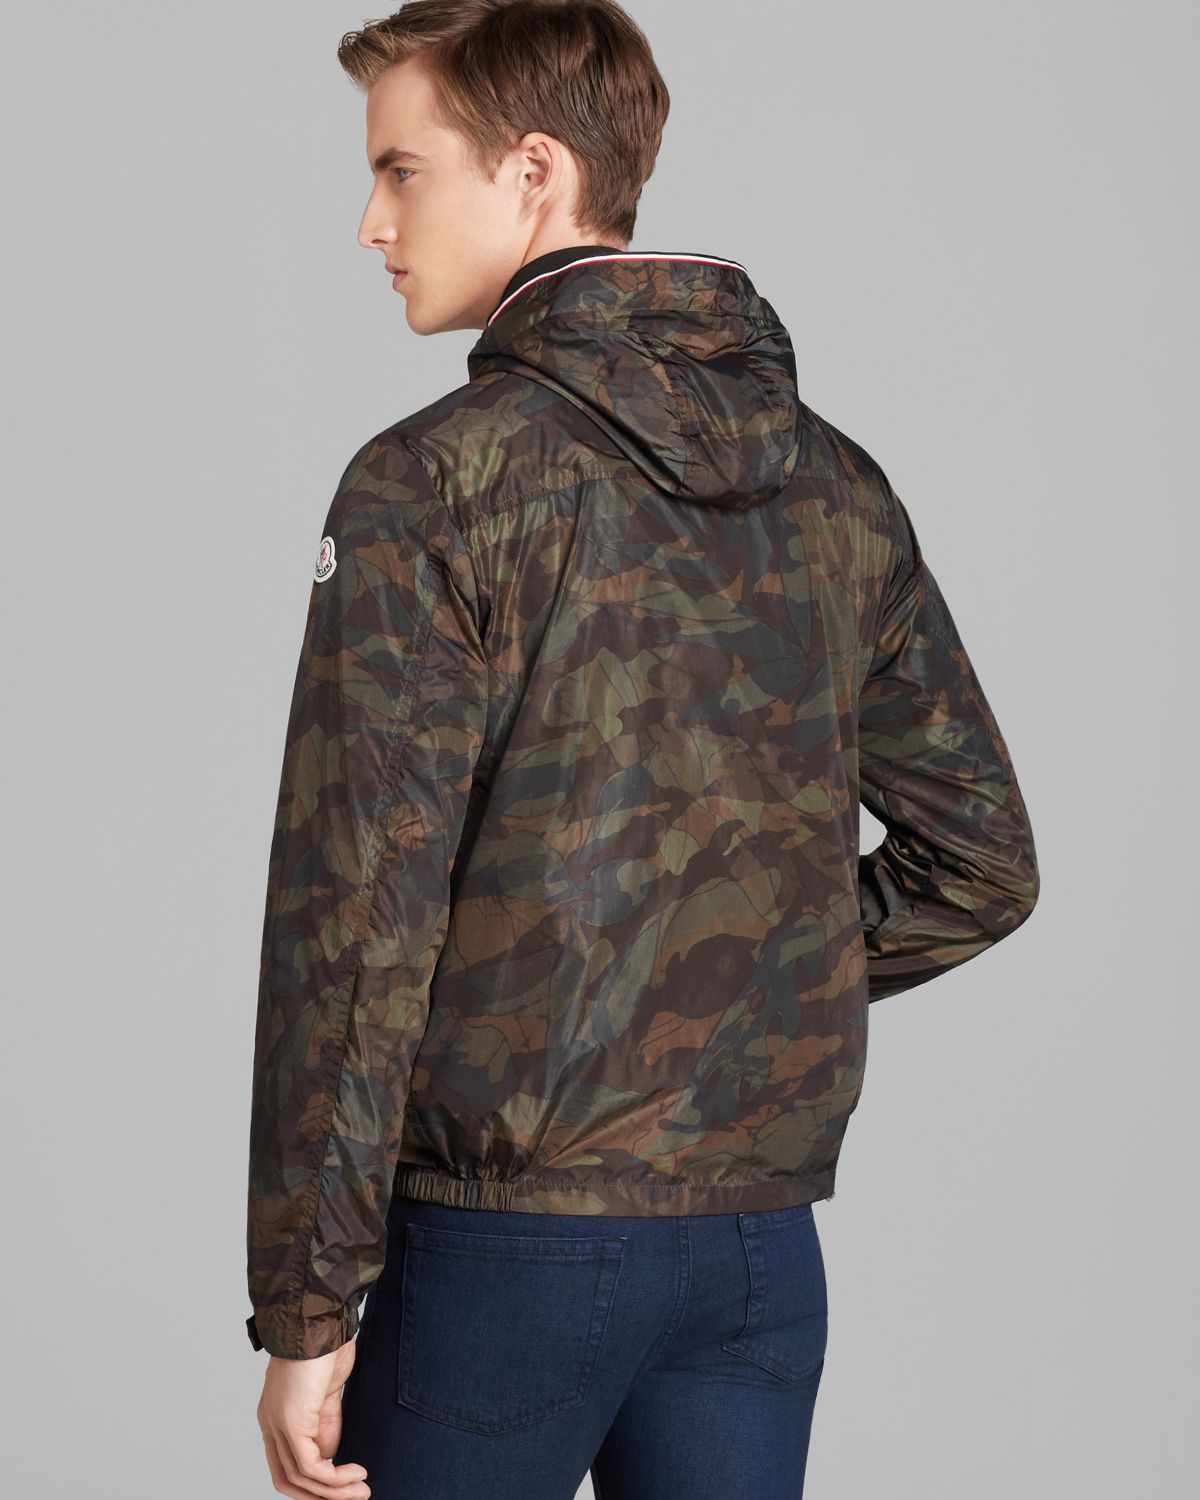 Moncler Nath Camo Lightweight Jacket in Green for Men - Lyst